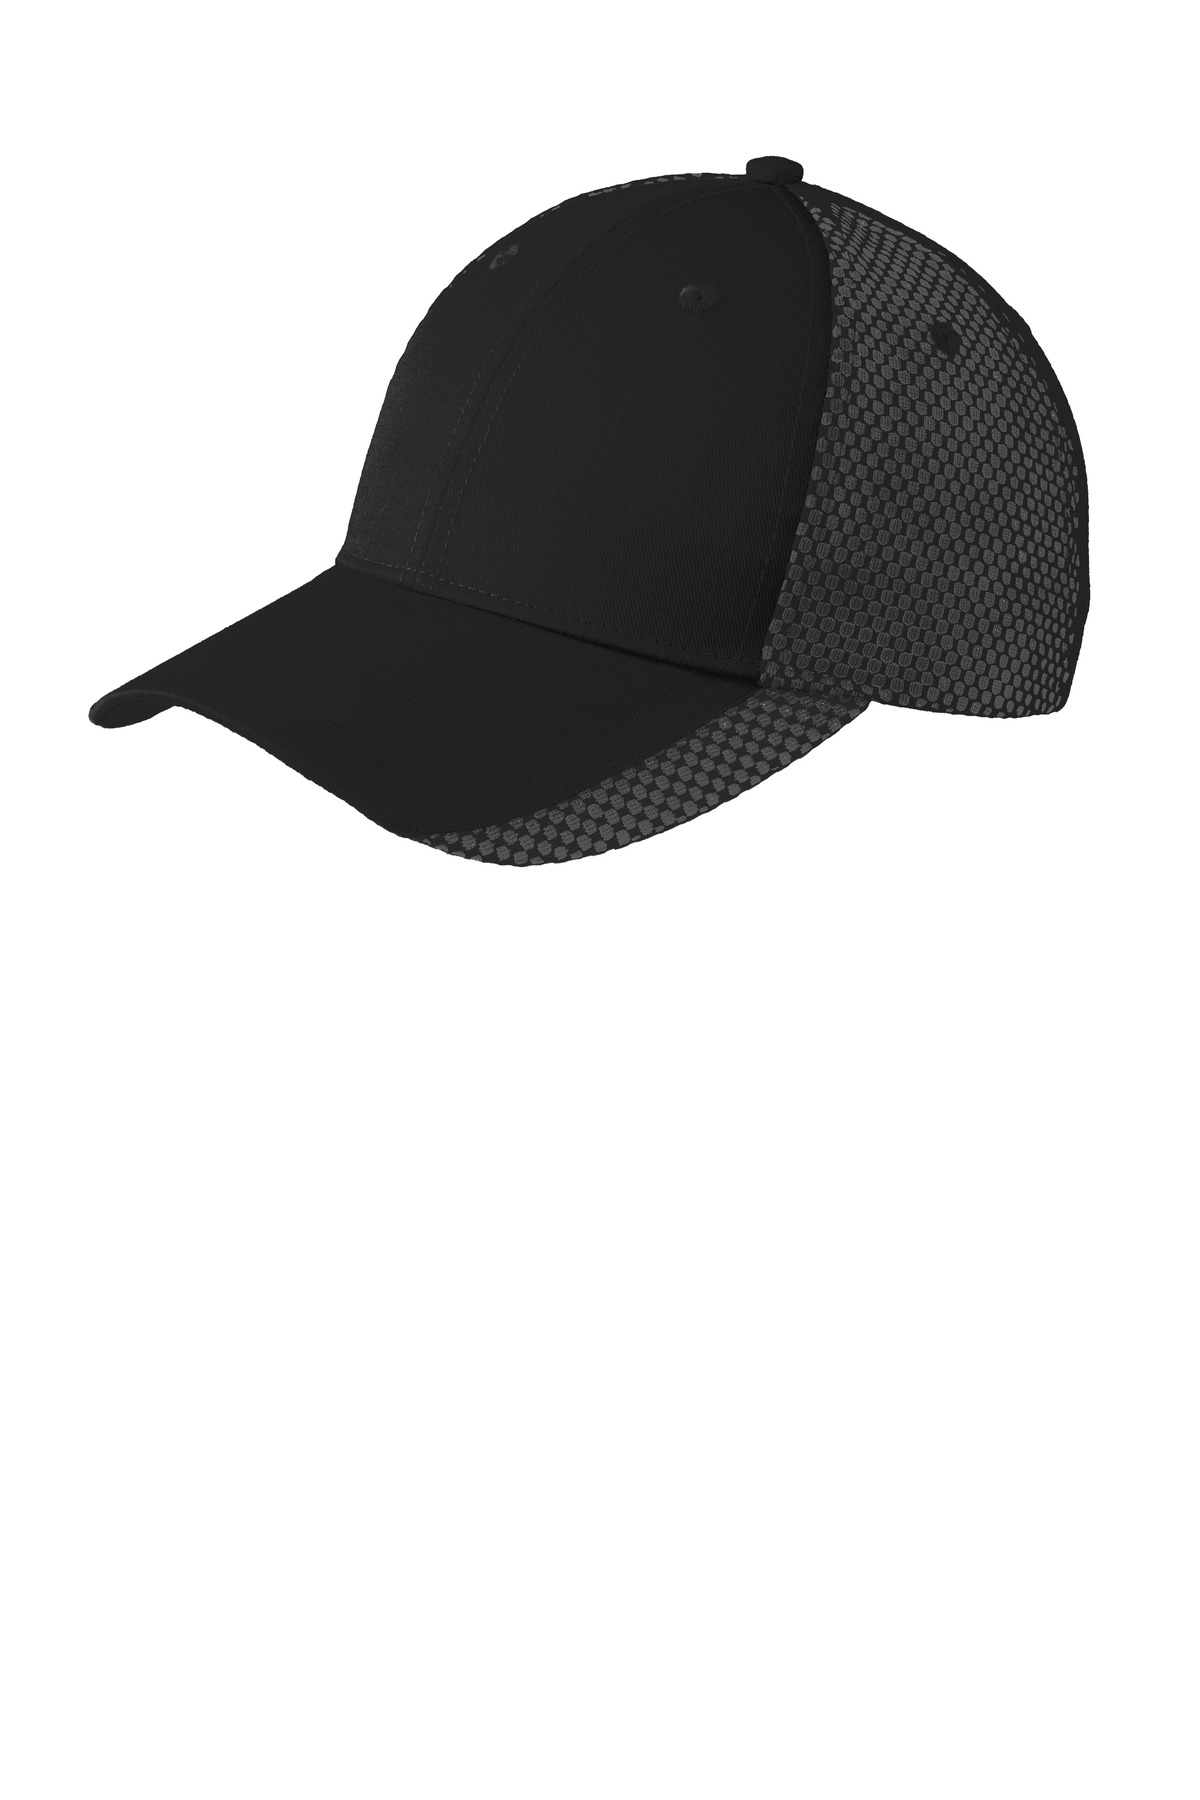 Port Authority Hospitality Caps ® Two-Color Mesh Back Cap.-Port Authority